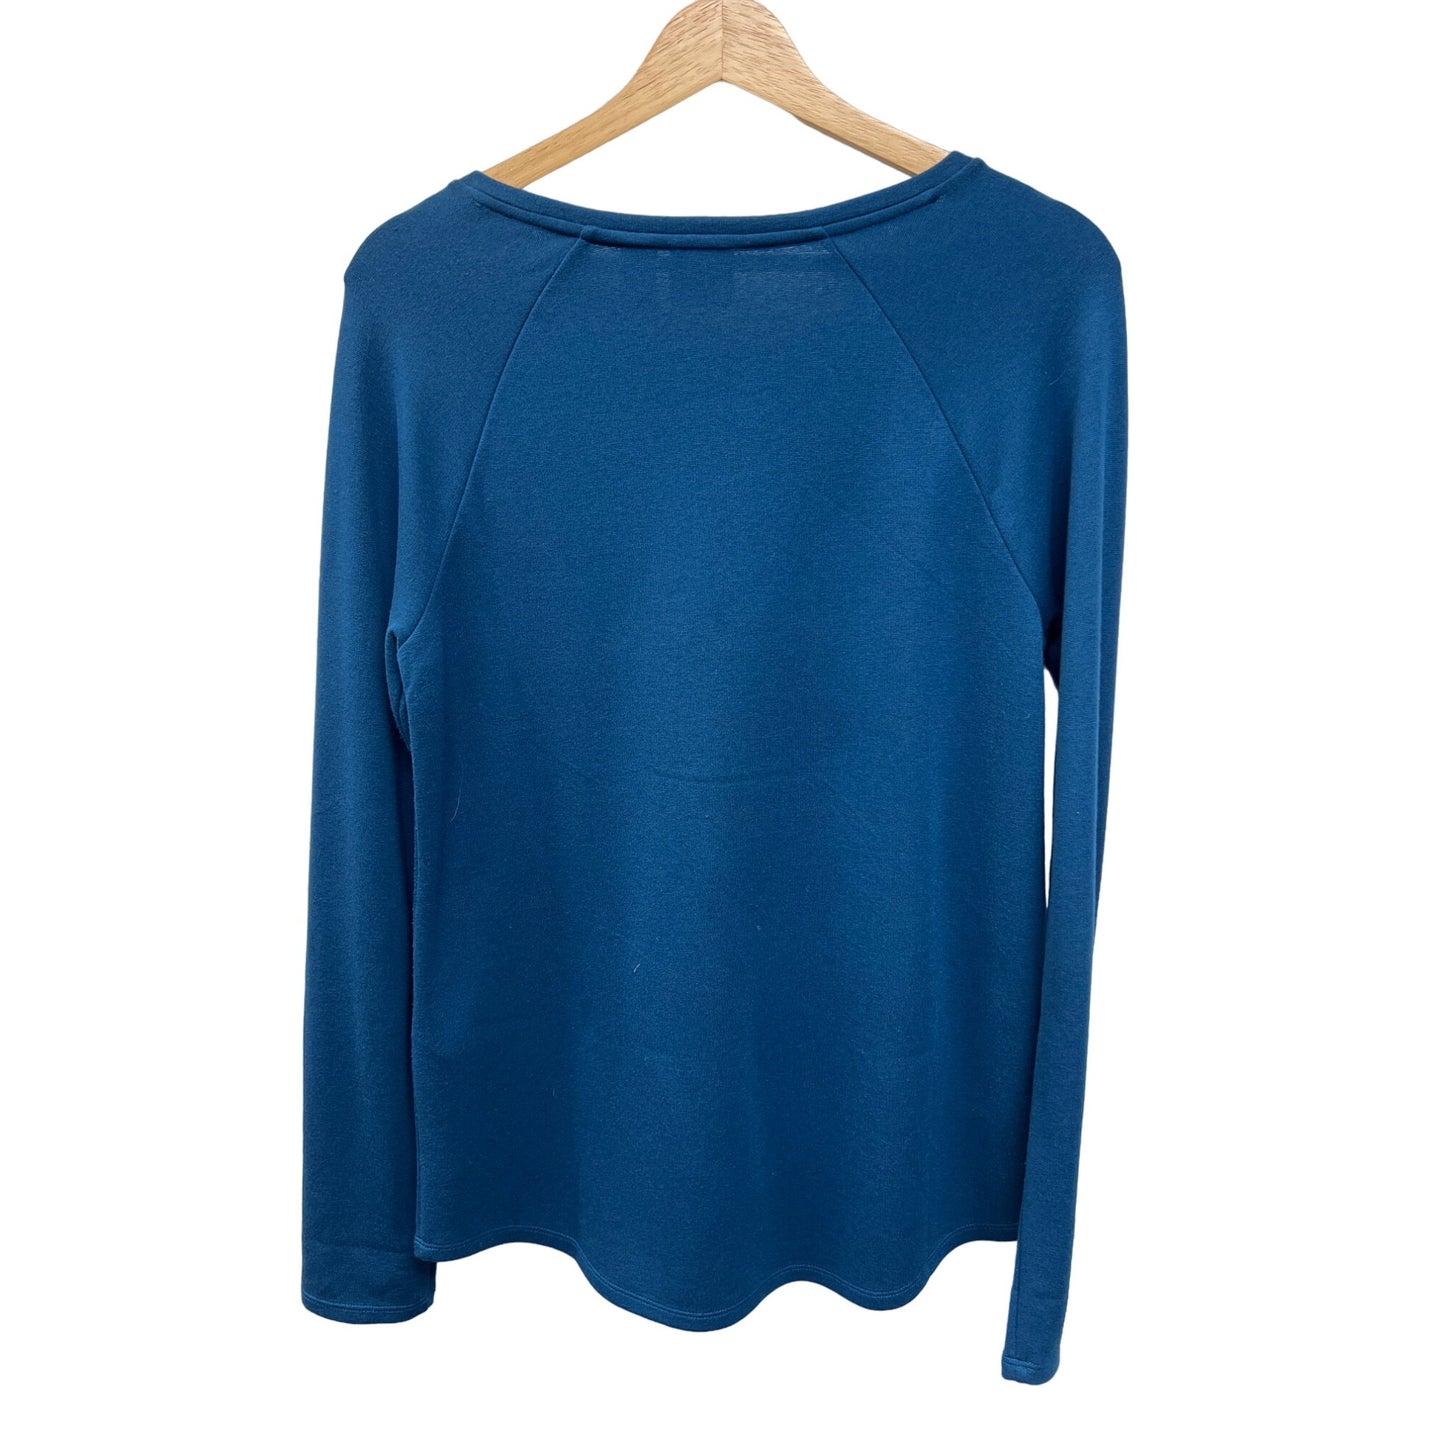 Chico's Soft Knit Blue Sweater with Gold Buttons